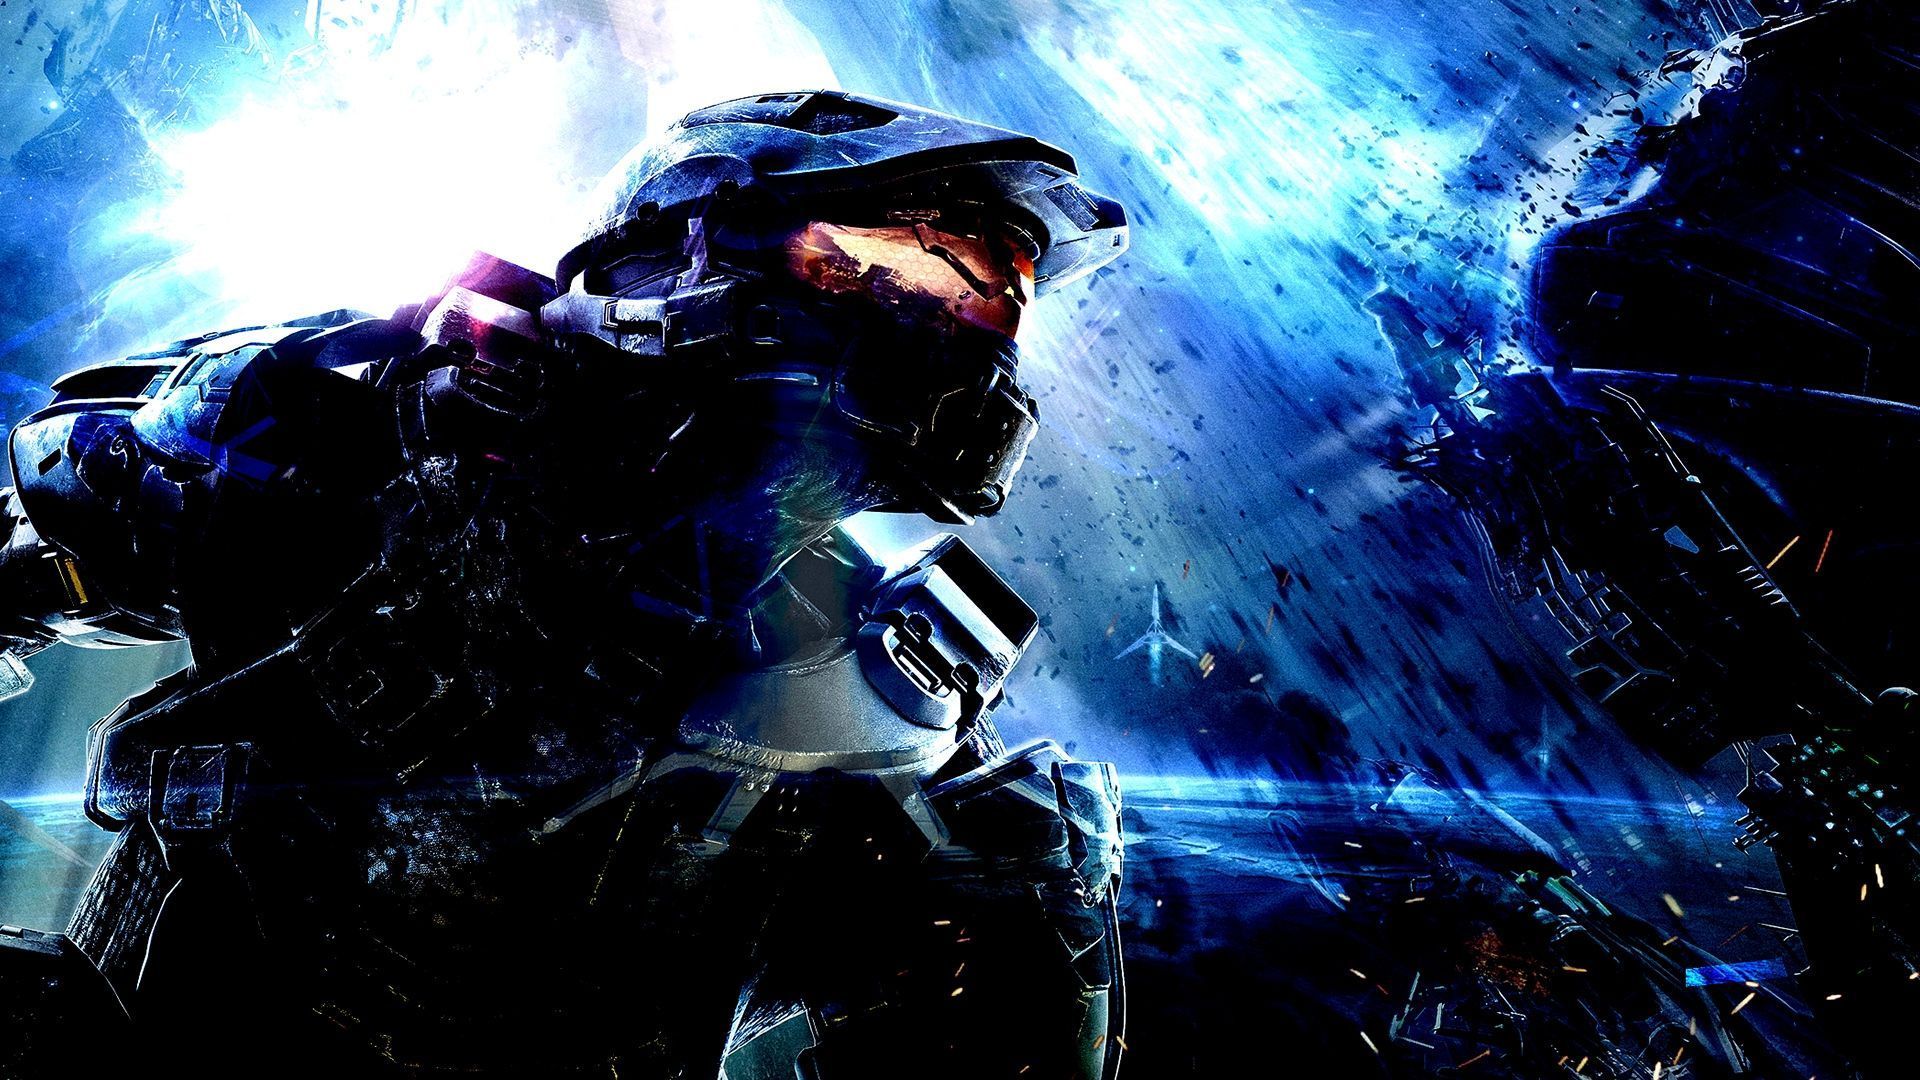 Halo 4 Wallpaper HD Free Download | New HD Wallpapers Download